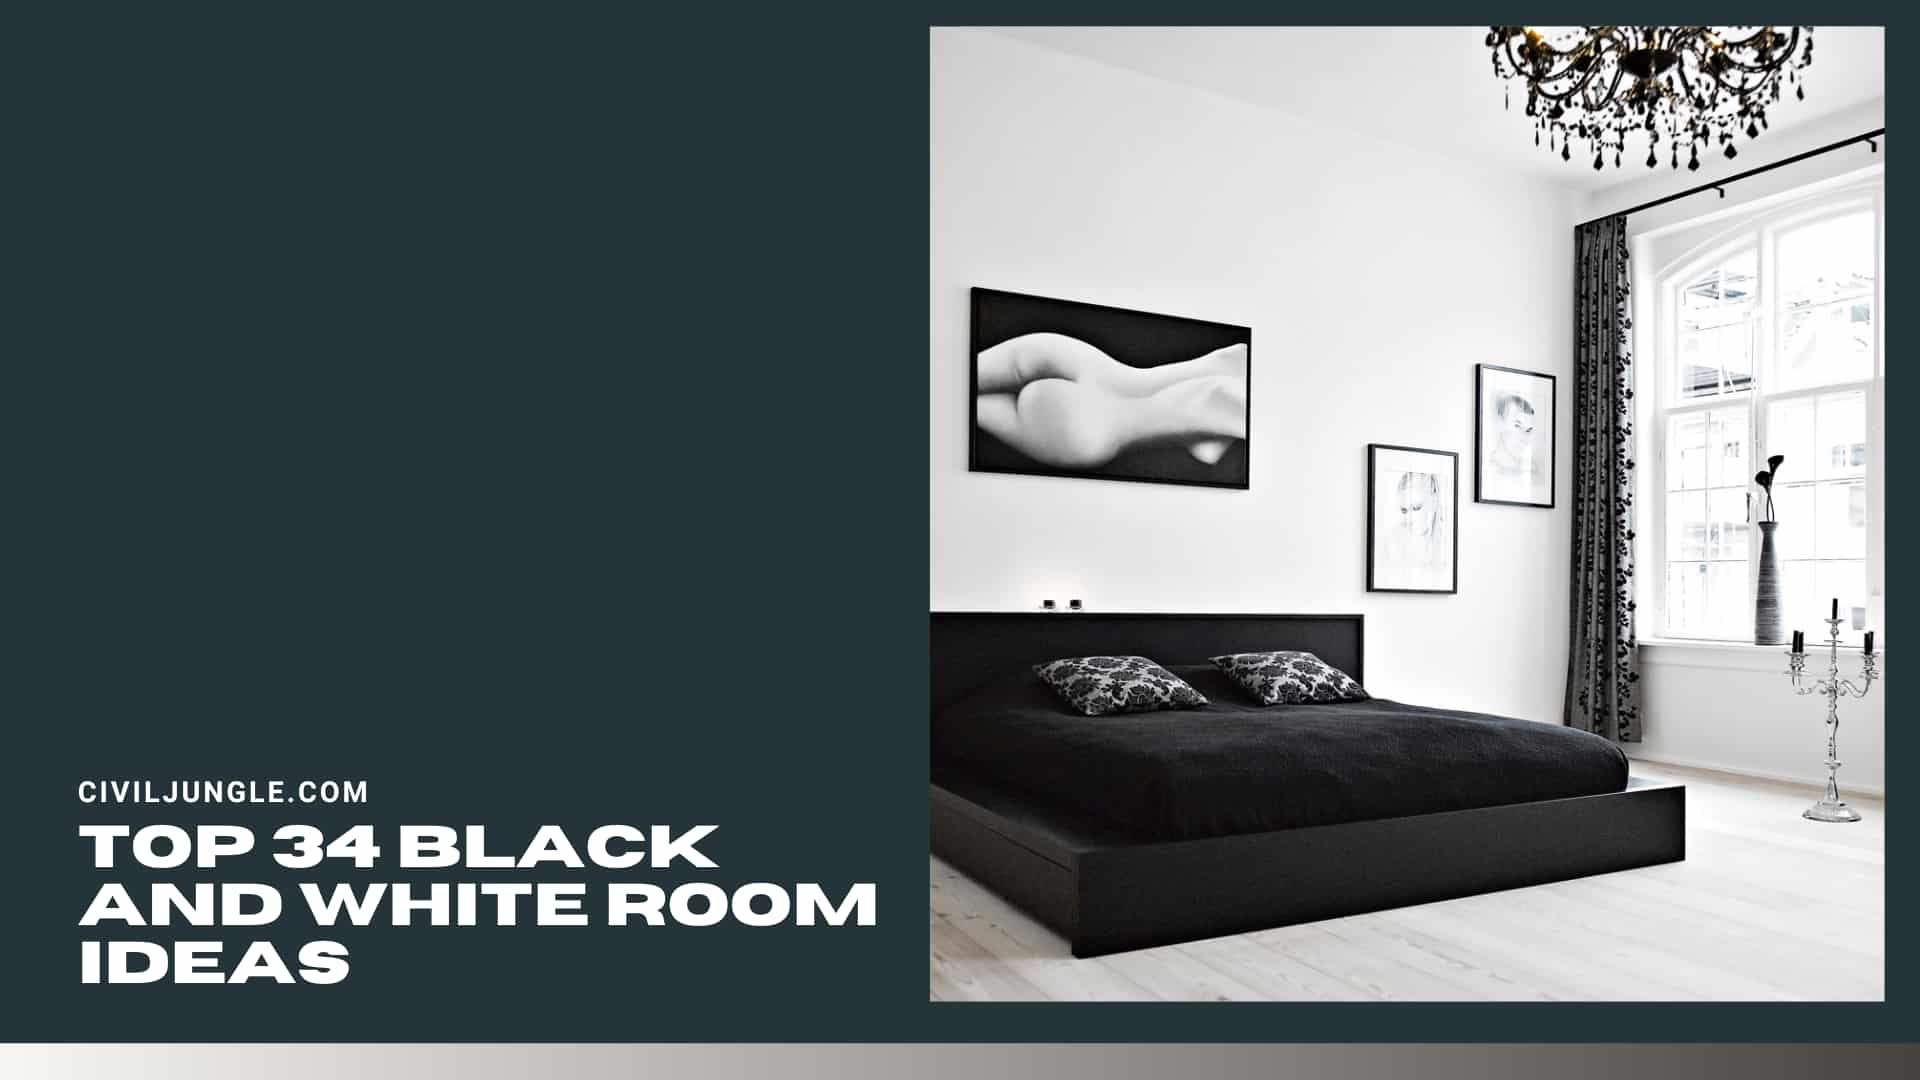 Top 34 Black and White Room Ideas